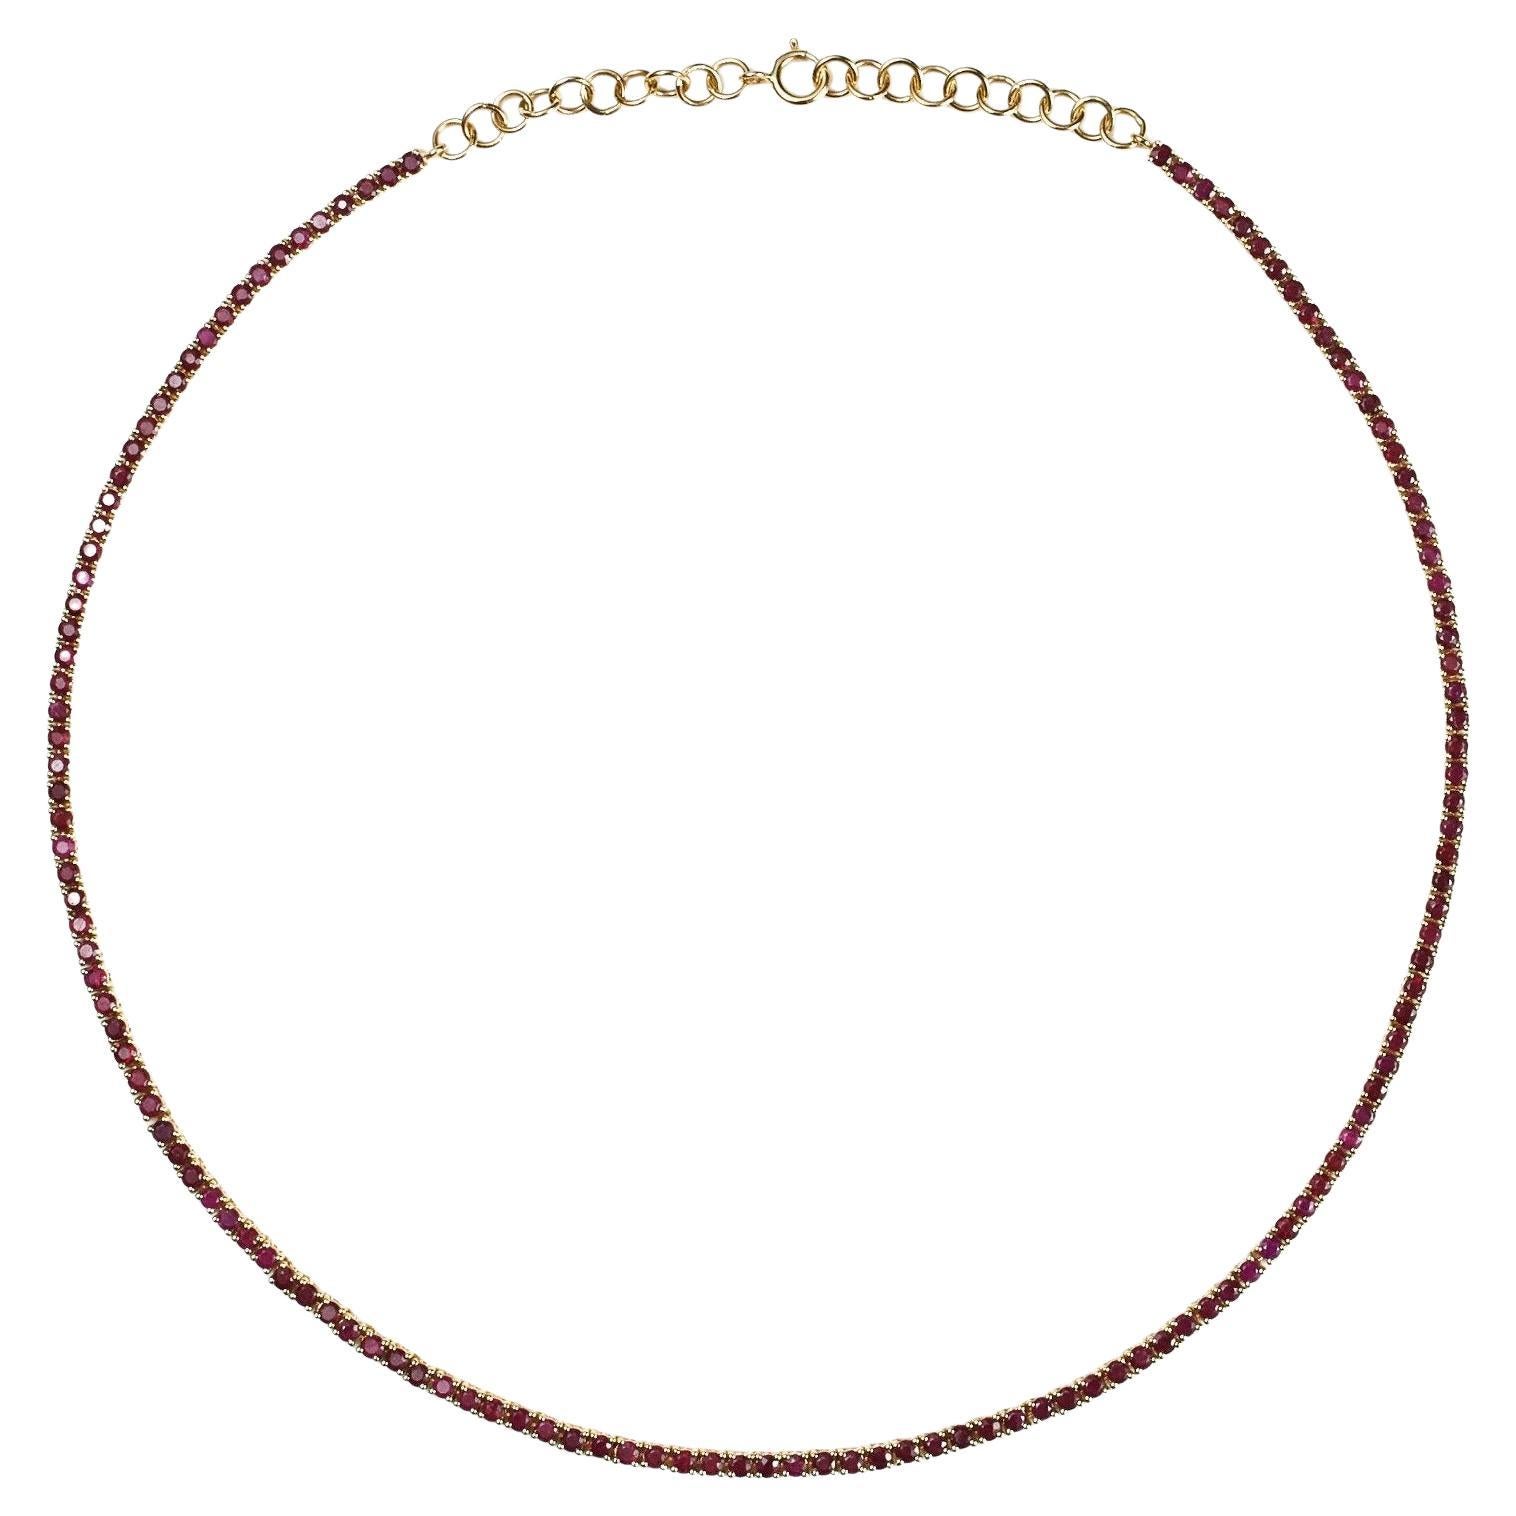 Ruby Tennis Necklace, Natural Round Rubies, 14k Yellow Gold